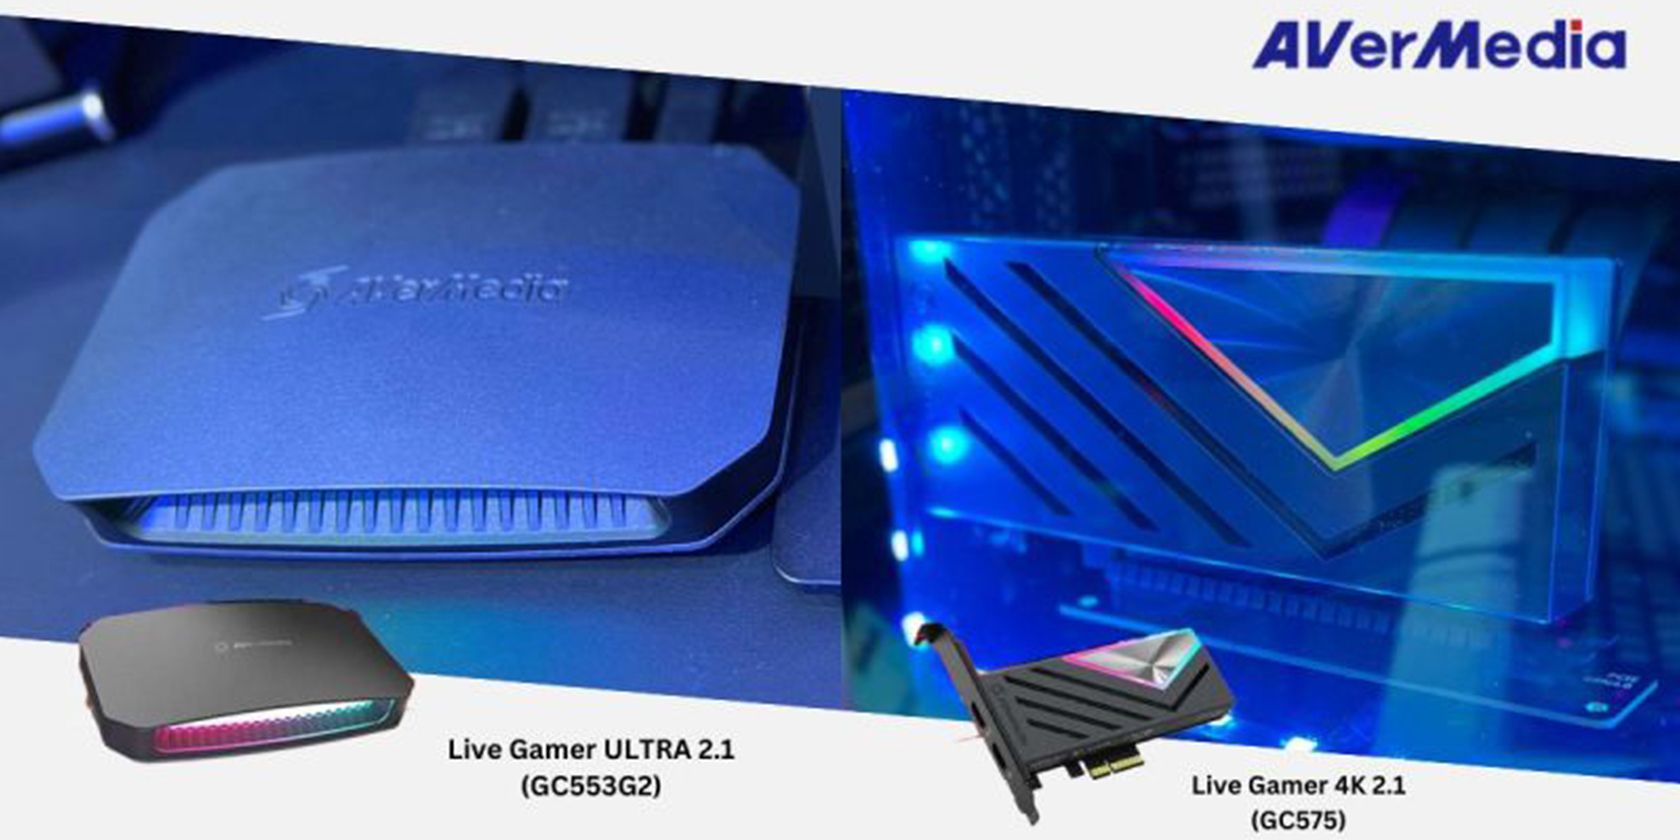 AVerMedia announcement image with two new capture cards